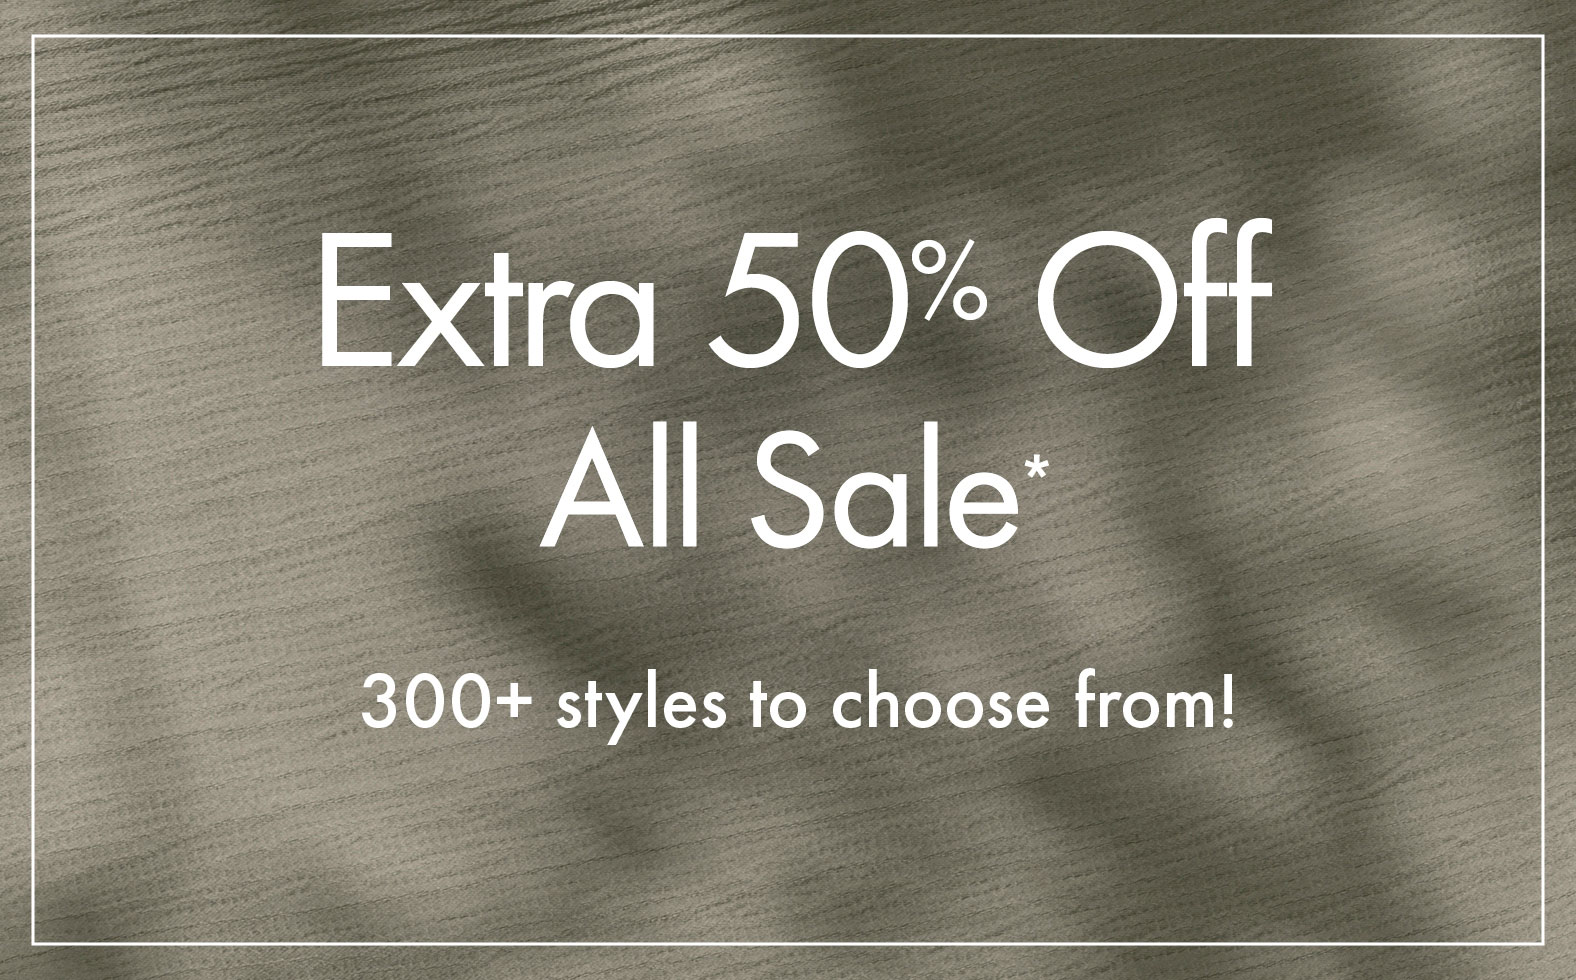 Extra 50% Off All Sale* | 300+ styles to choose from!